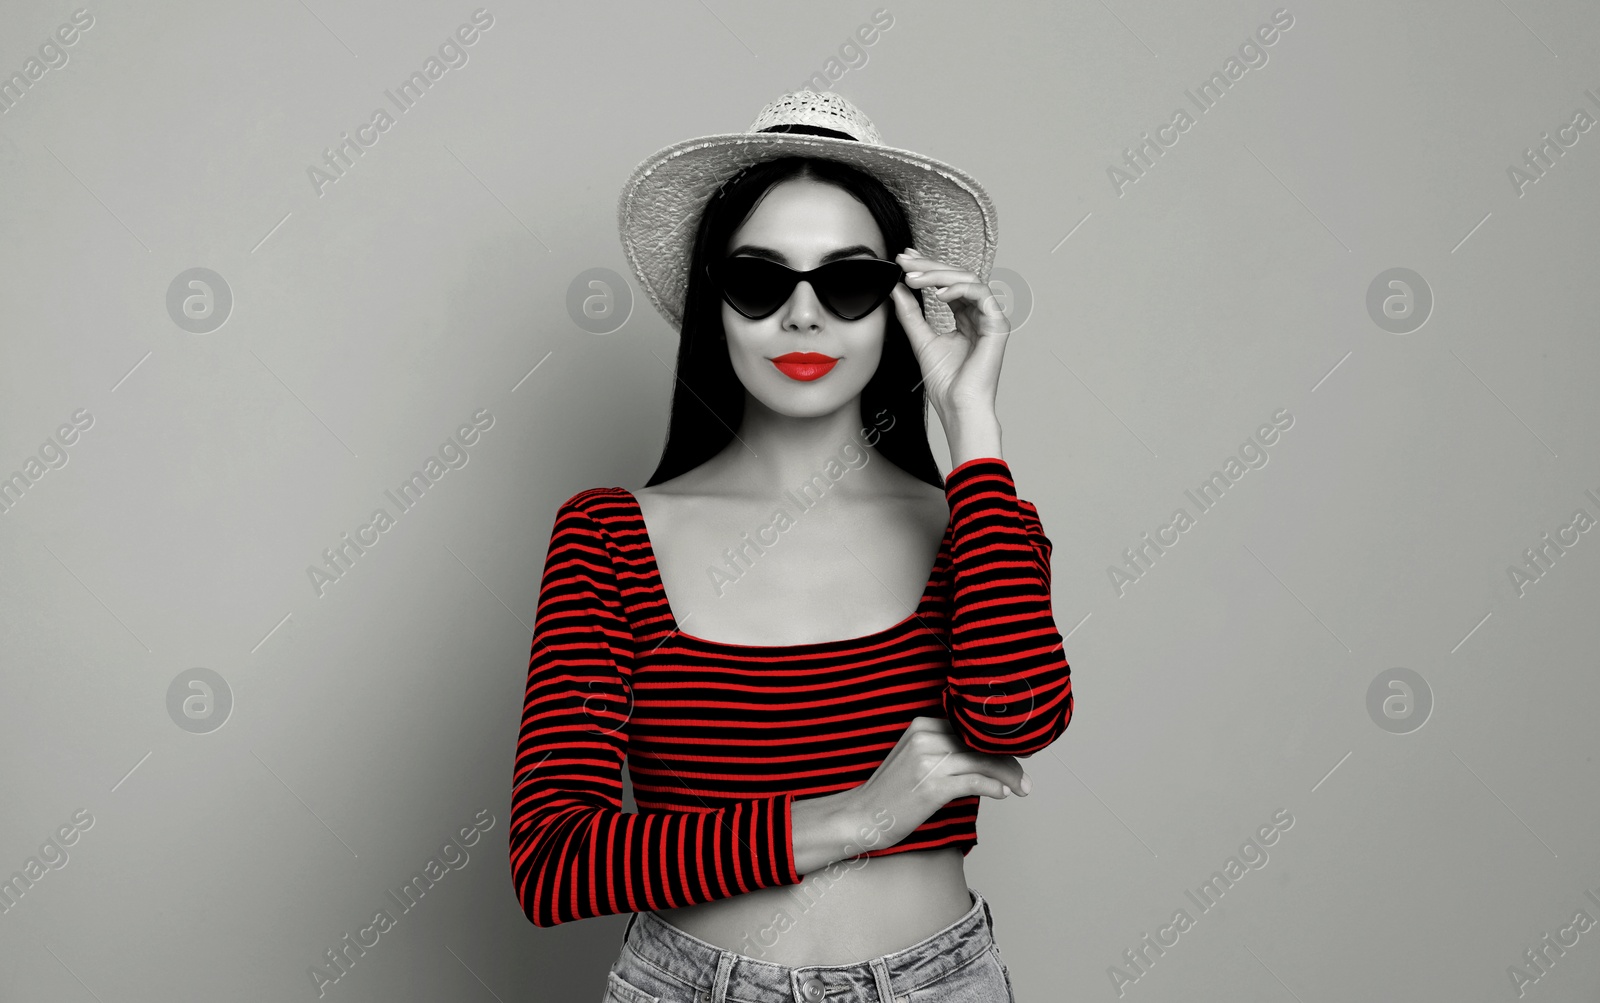 Image of Attractive woman in stylish sunglasses on light grey background. Black and white photo with red accent